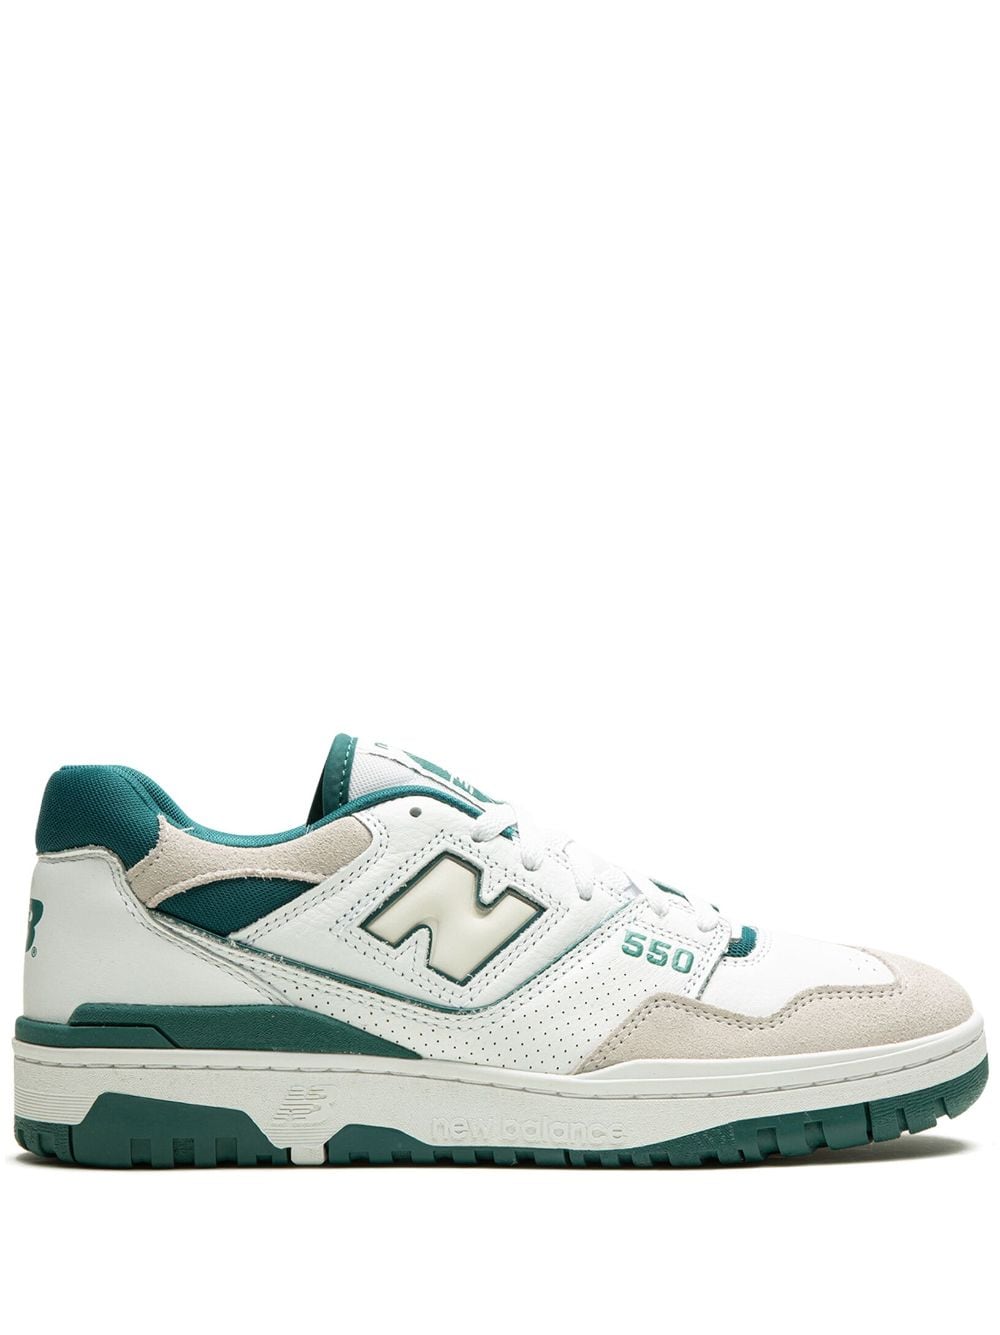 New Balance 550 "Vintage Teal" sneakers - White